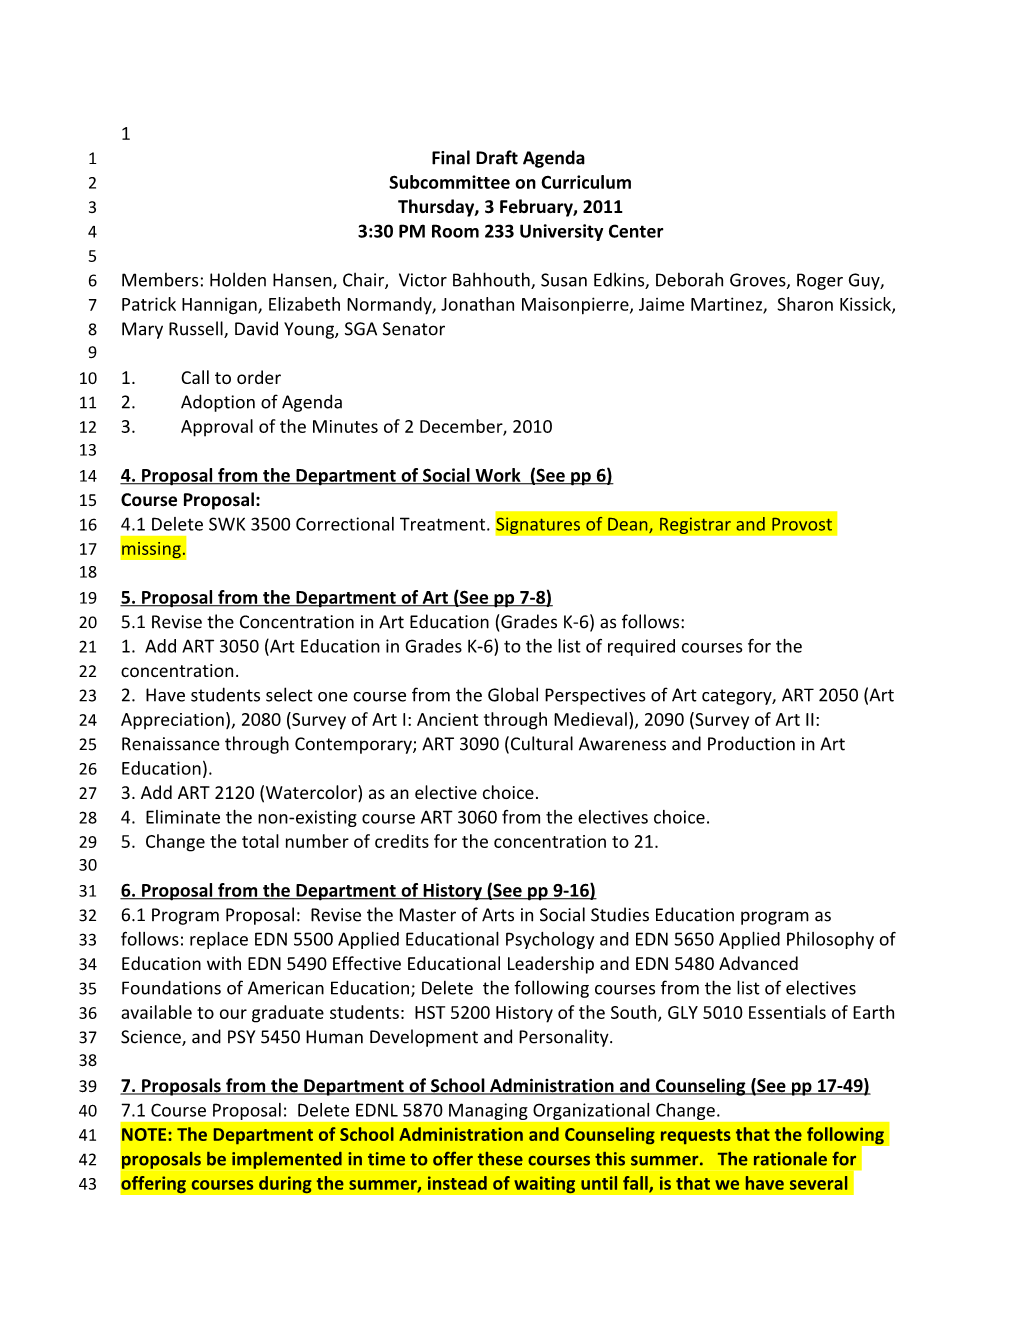 Final Draft Agenda Subcommittee on Curriculum Thursday, 3 February, 2011 3:30 PM Room